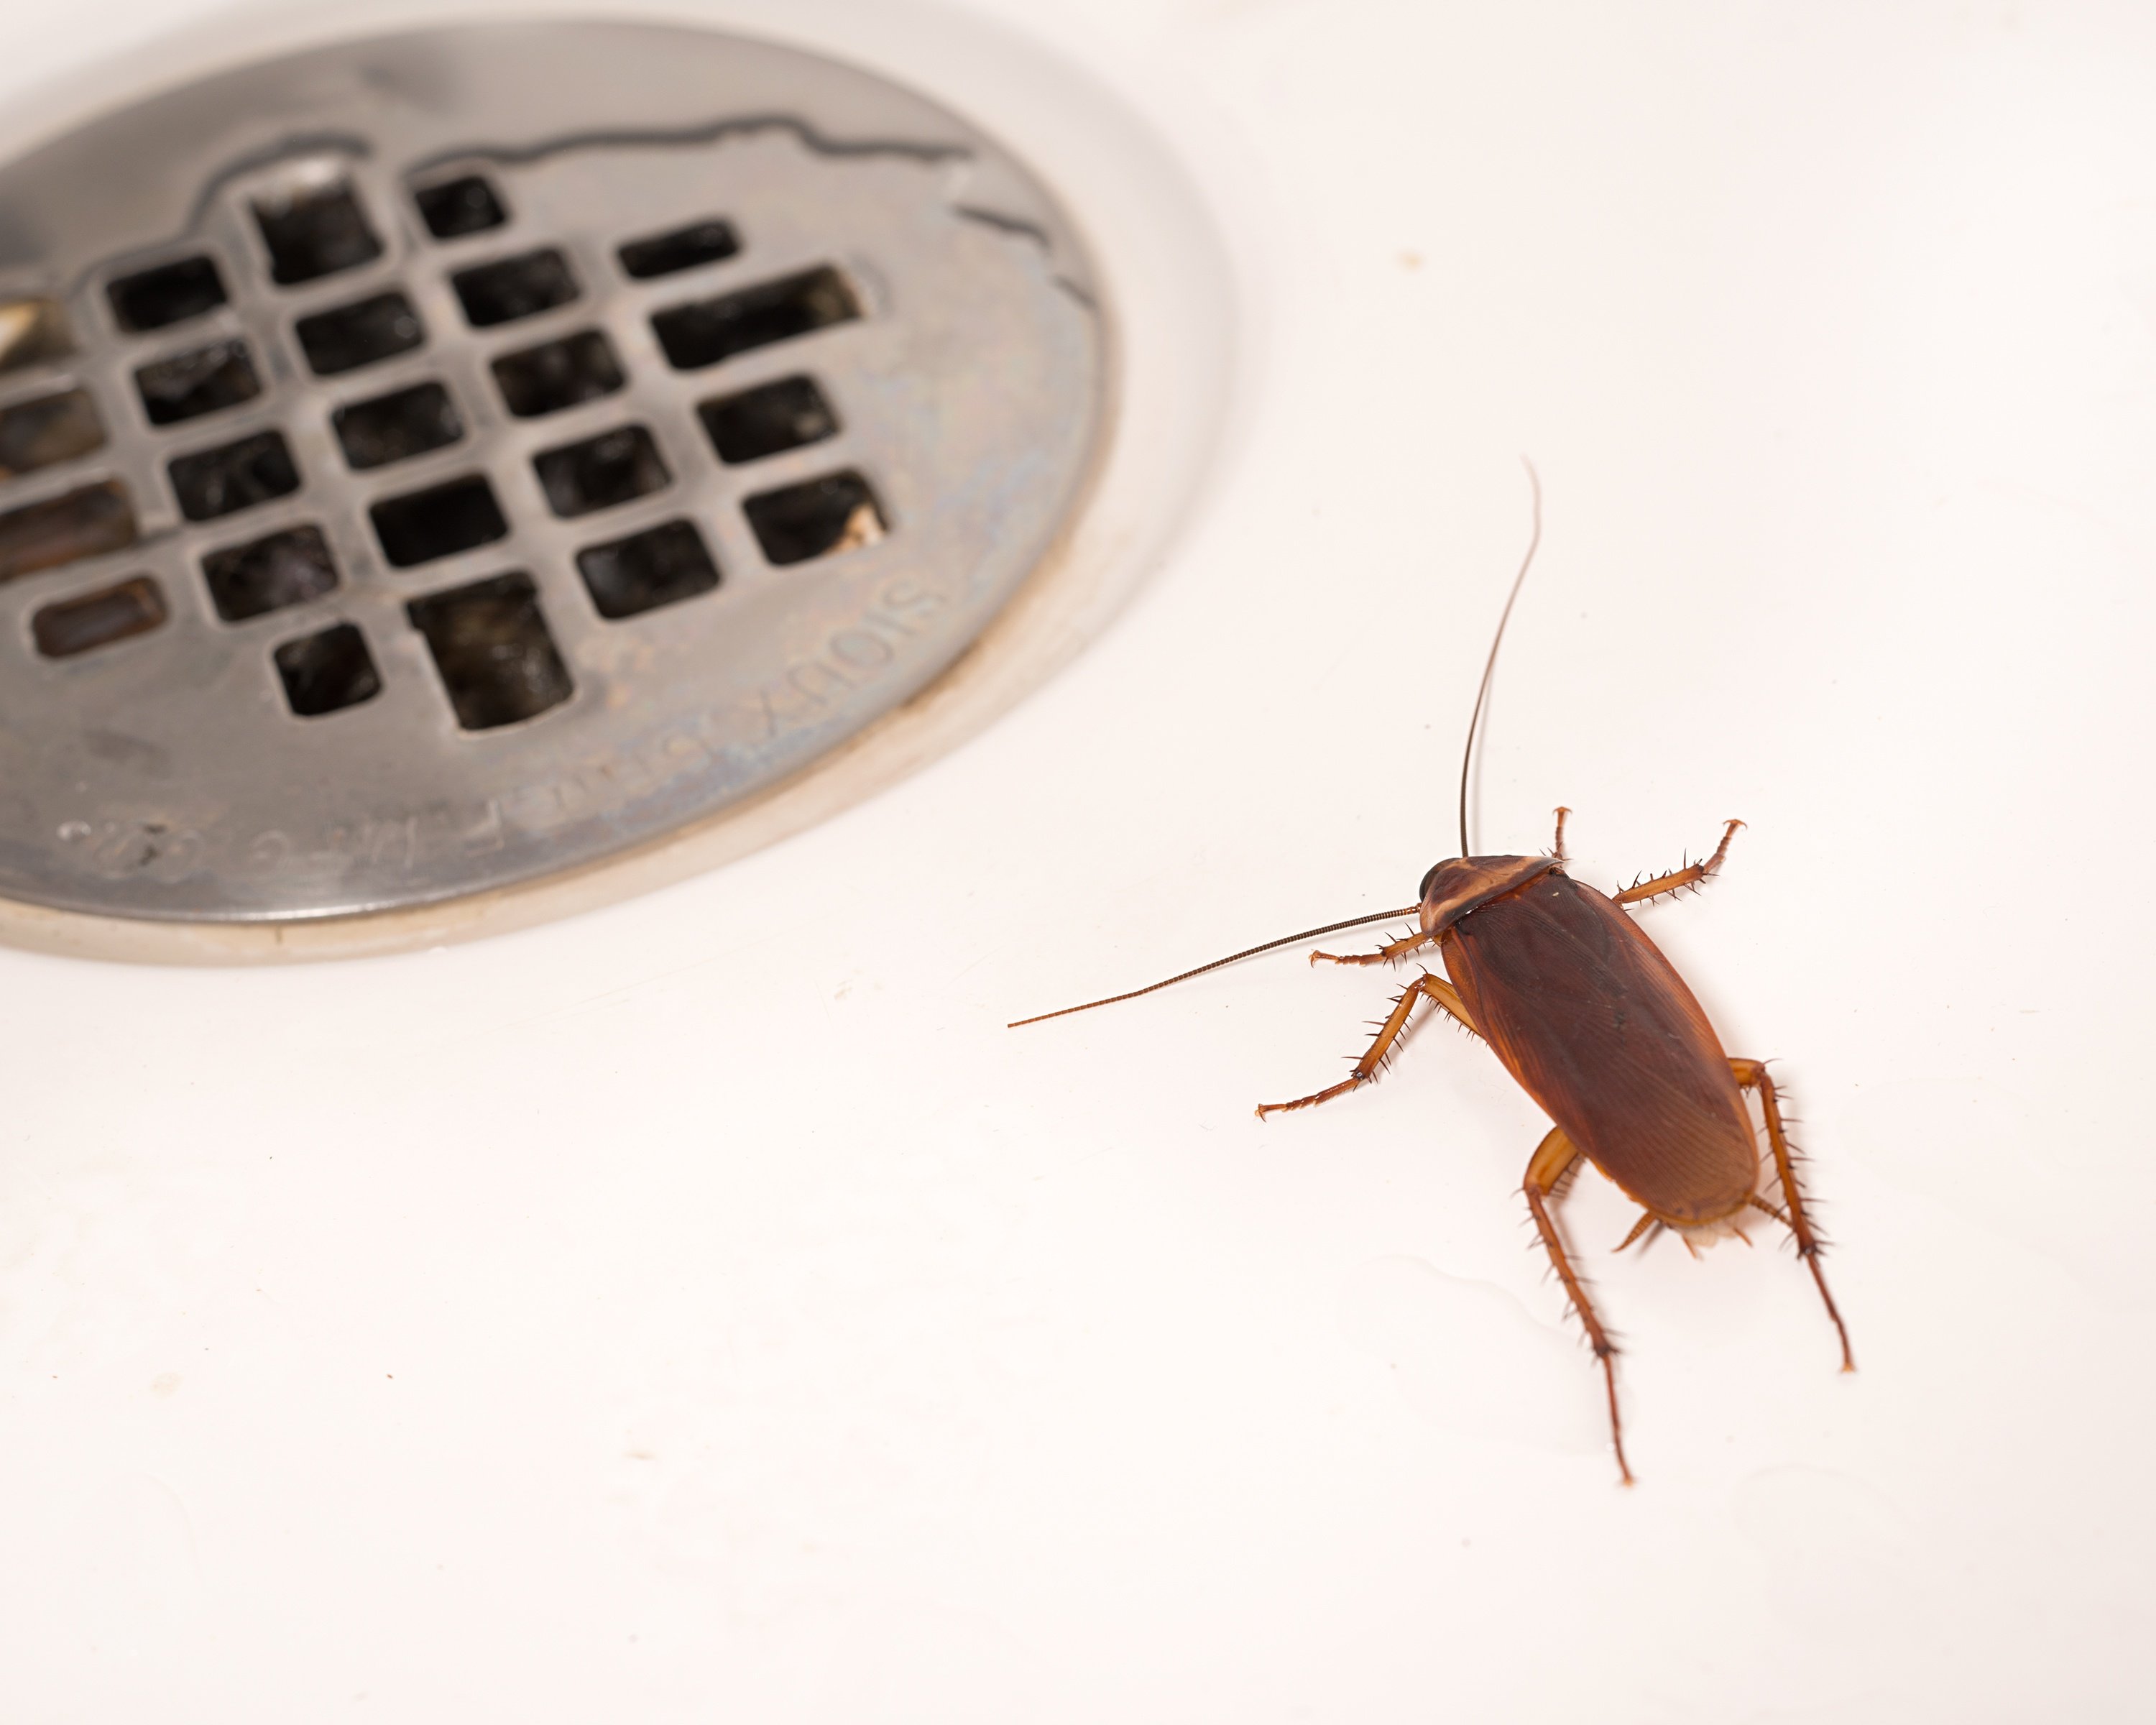 Why Are There Bugs In My Bathroom, Roaches In Bathtub